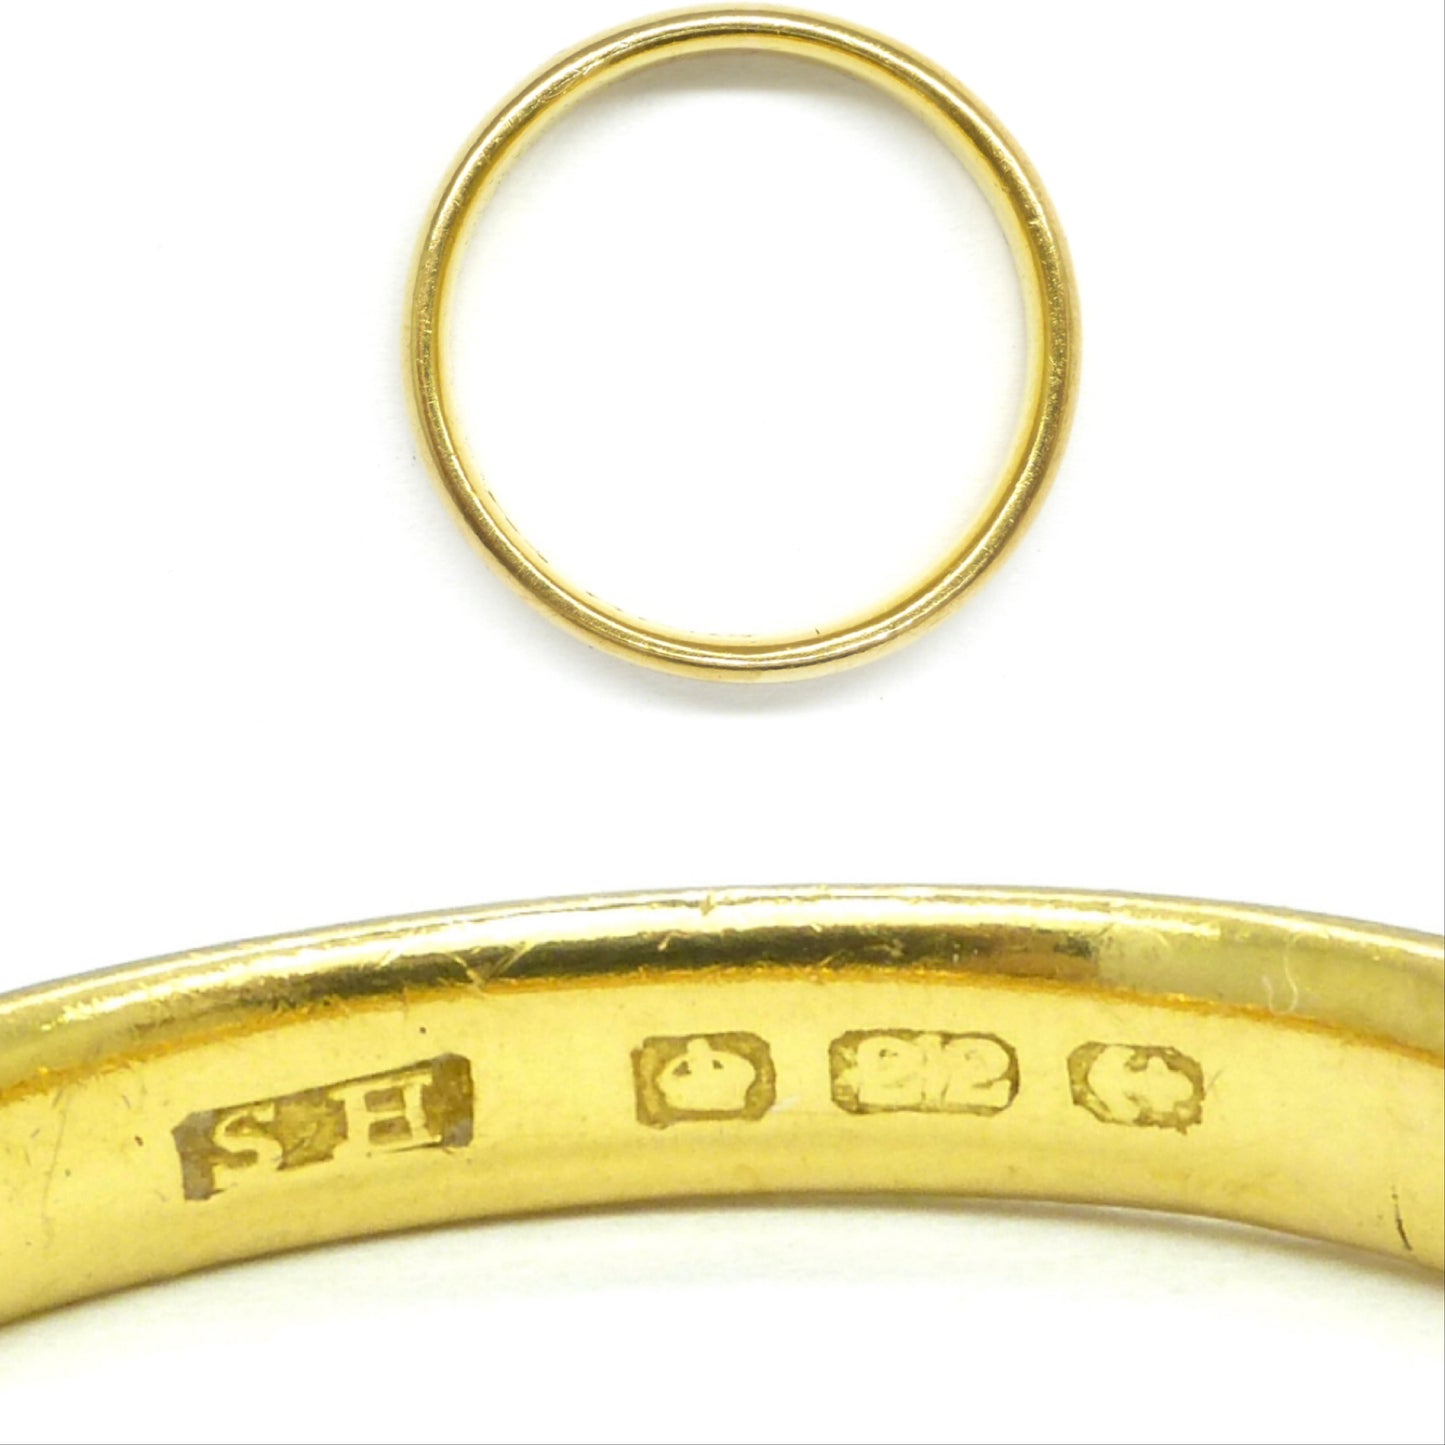 Vintage English 22ct gold wedding ring c1950's ~ gold band 5.2g ~ Size S